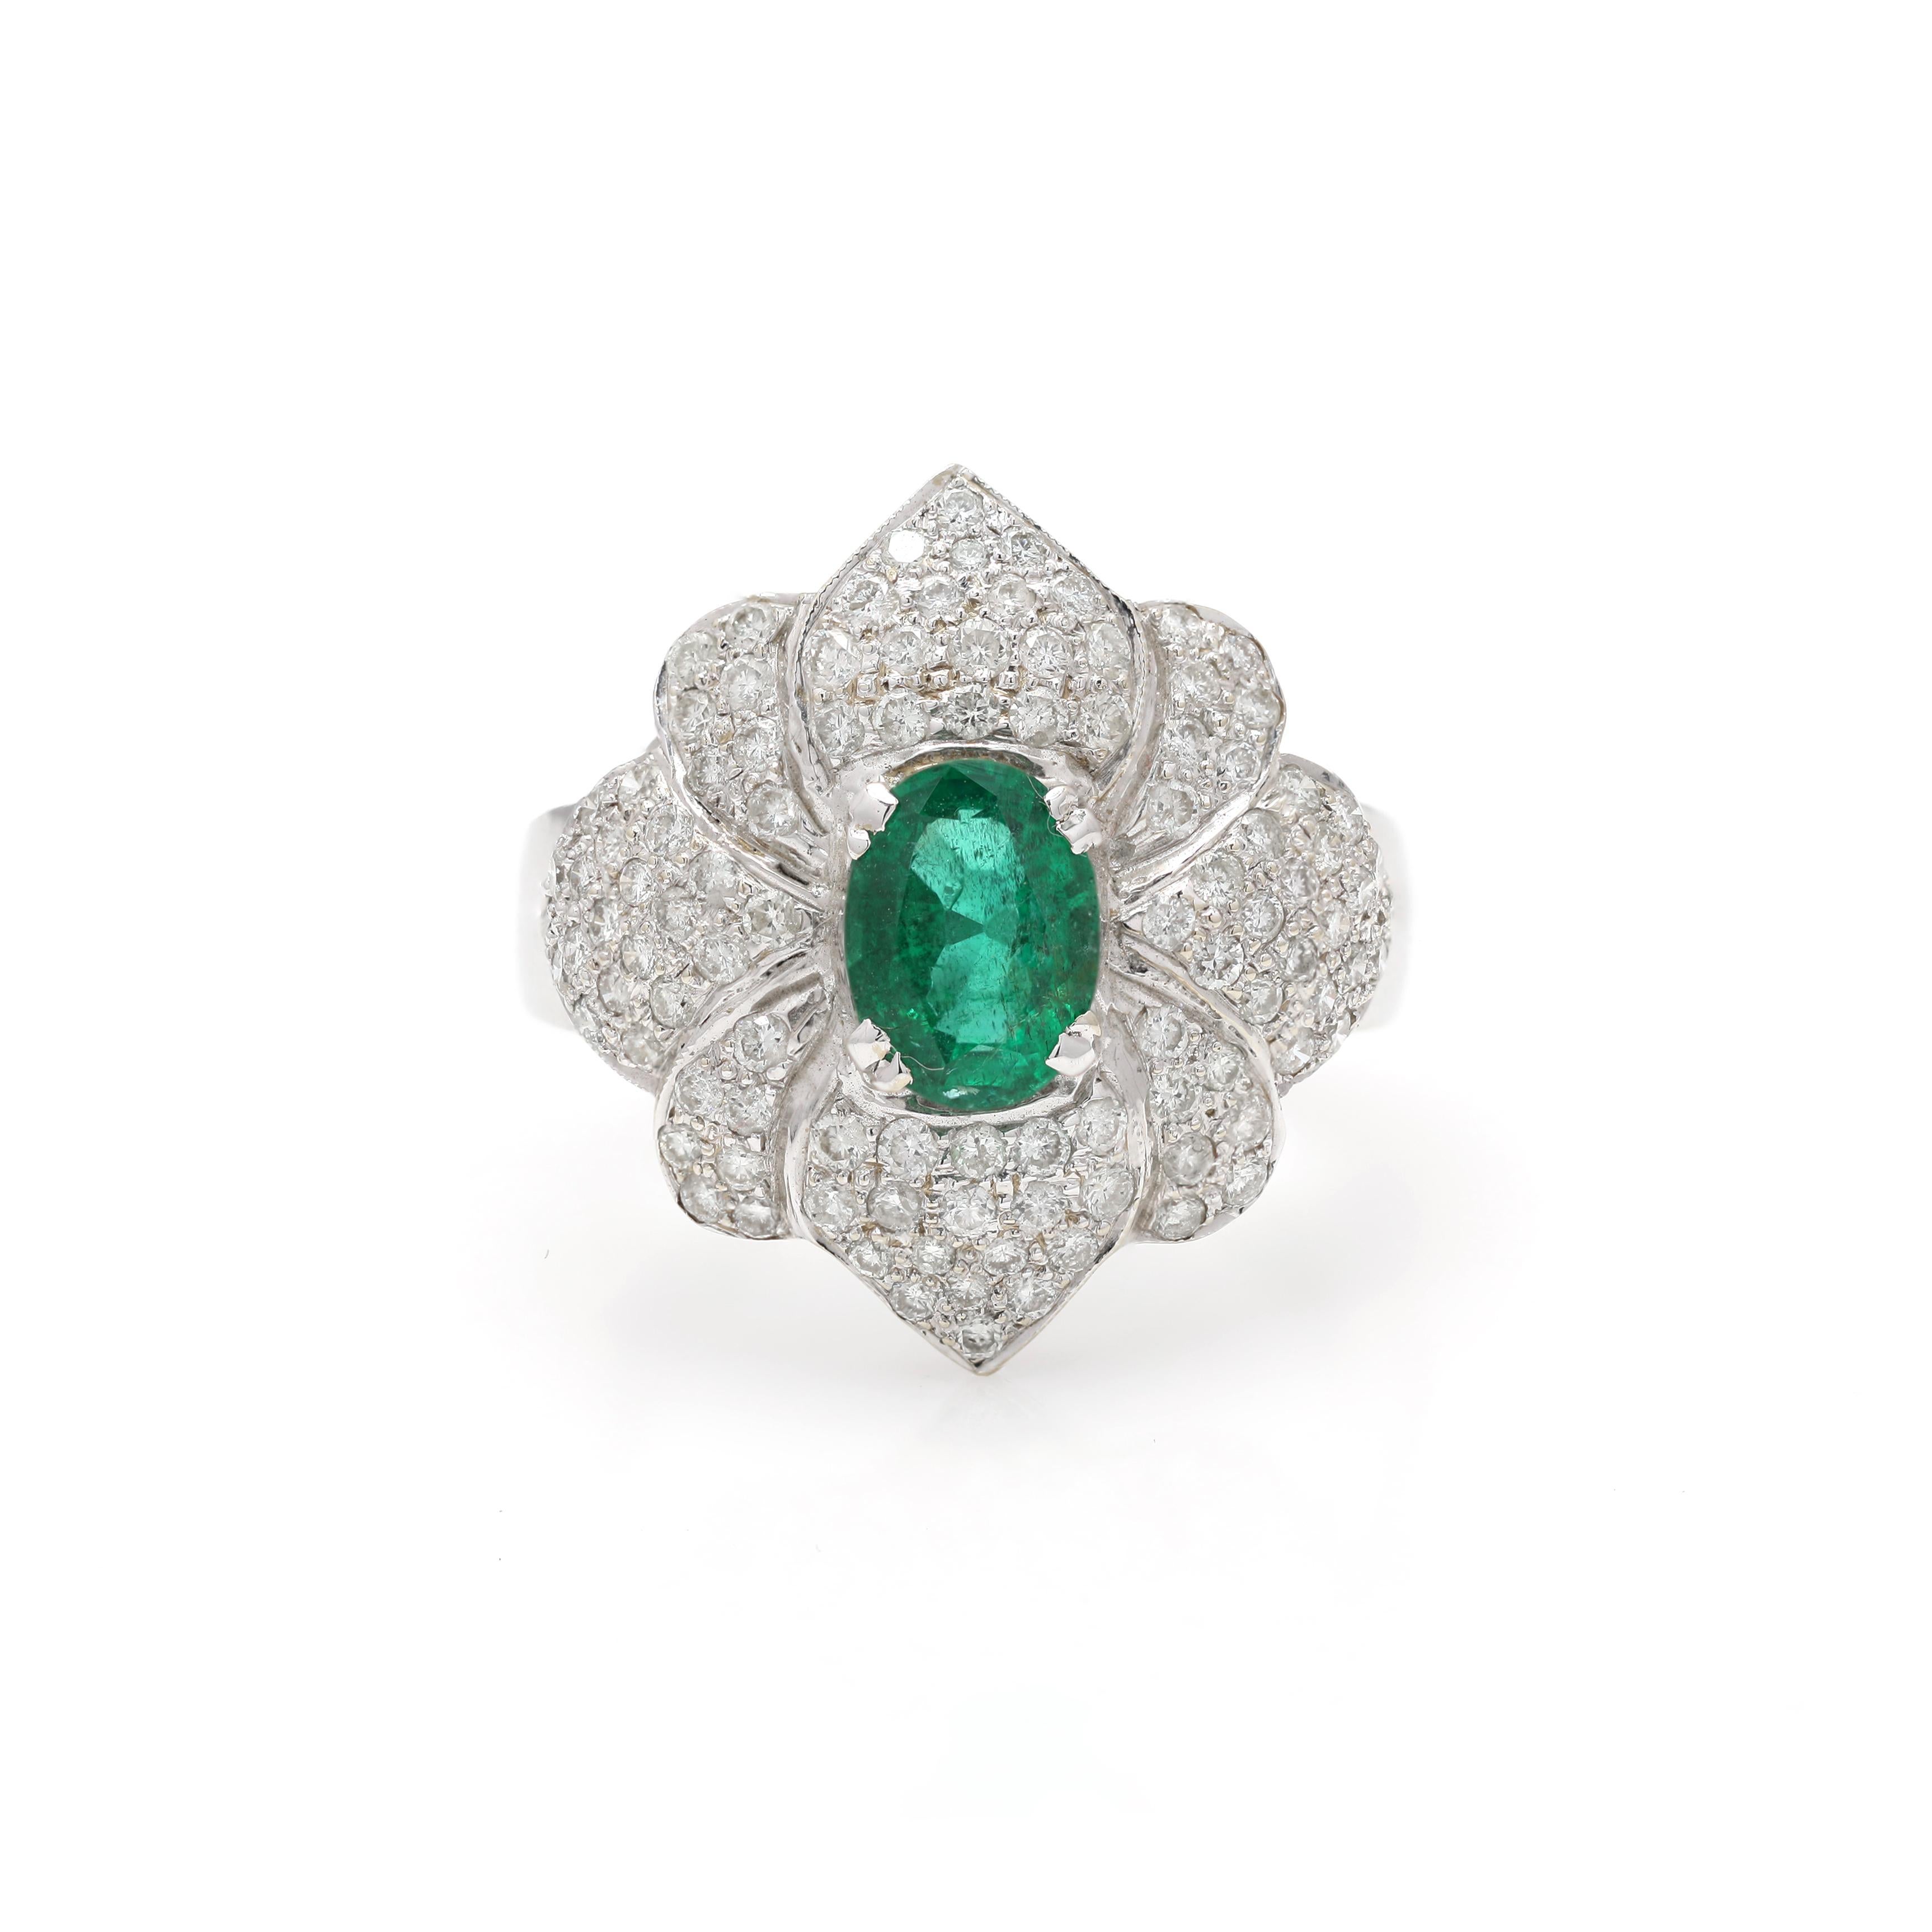 For Sale:  Designer Diamond and Emerald Floral Statement Ring in Solid 18k White Gold 4